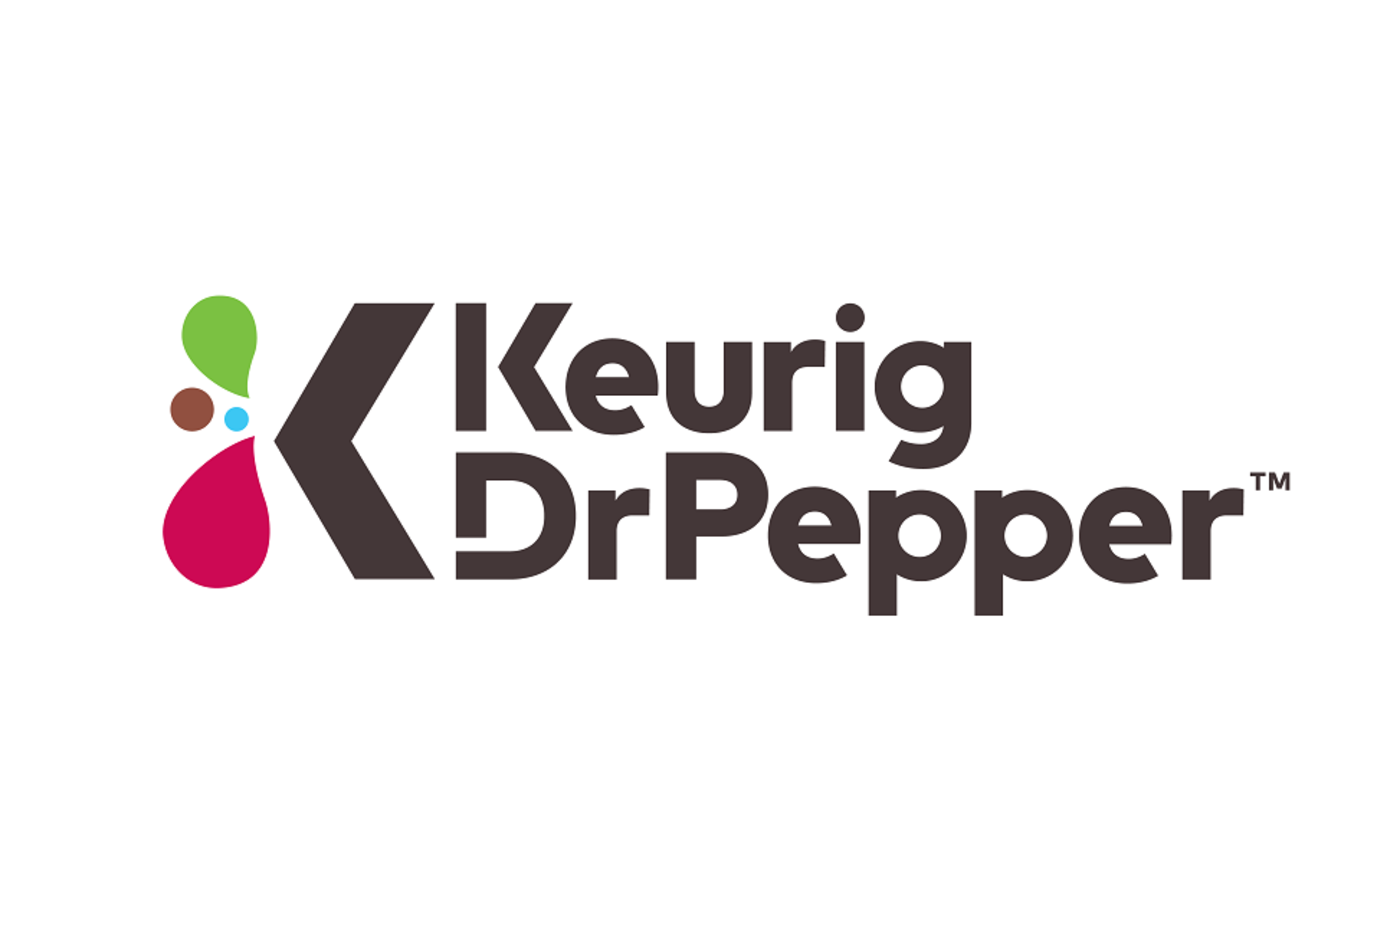 Hire Heroes USA Featured Employer: Keurig Dr Pepper